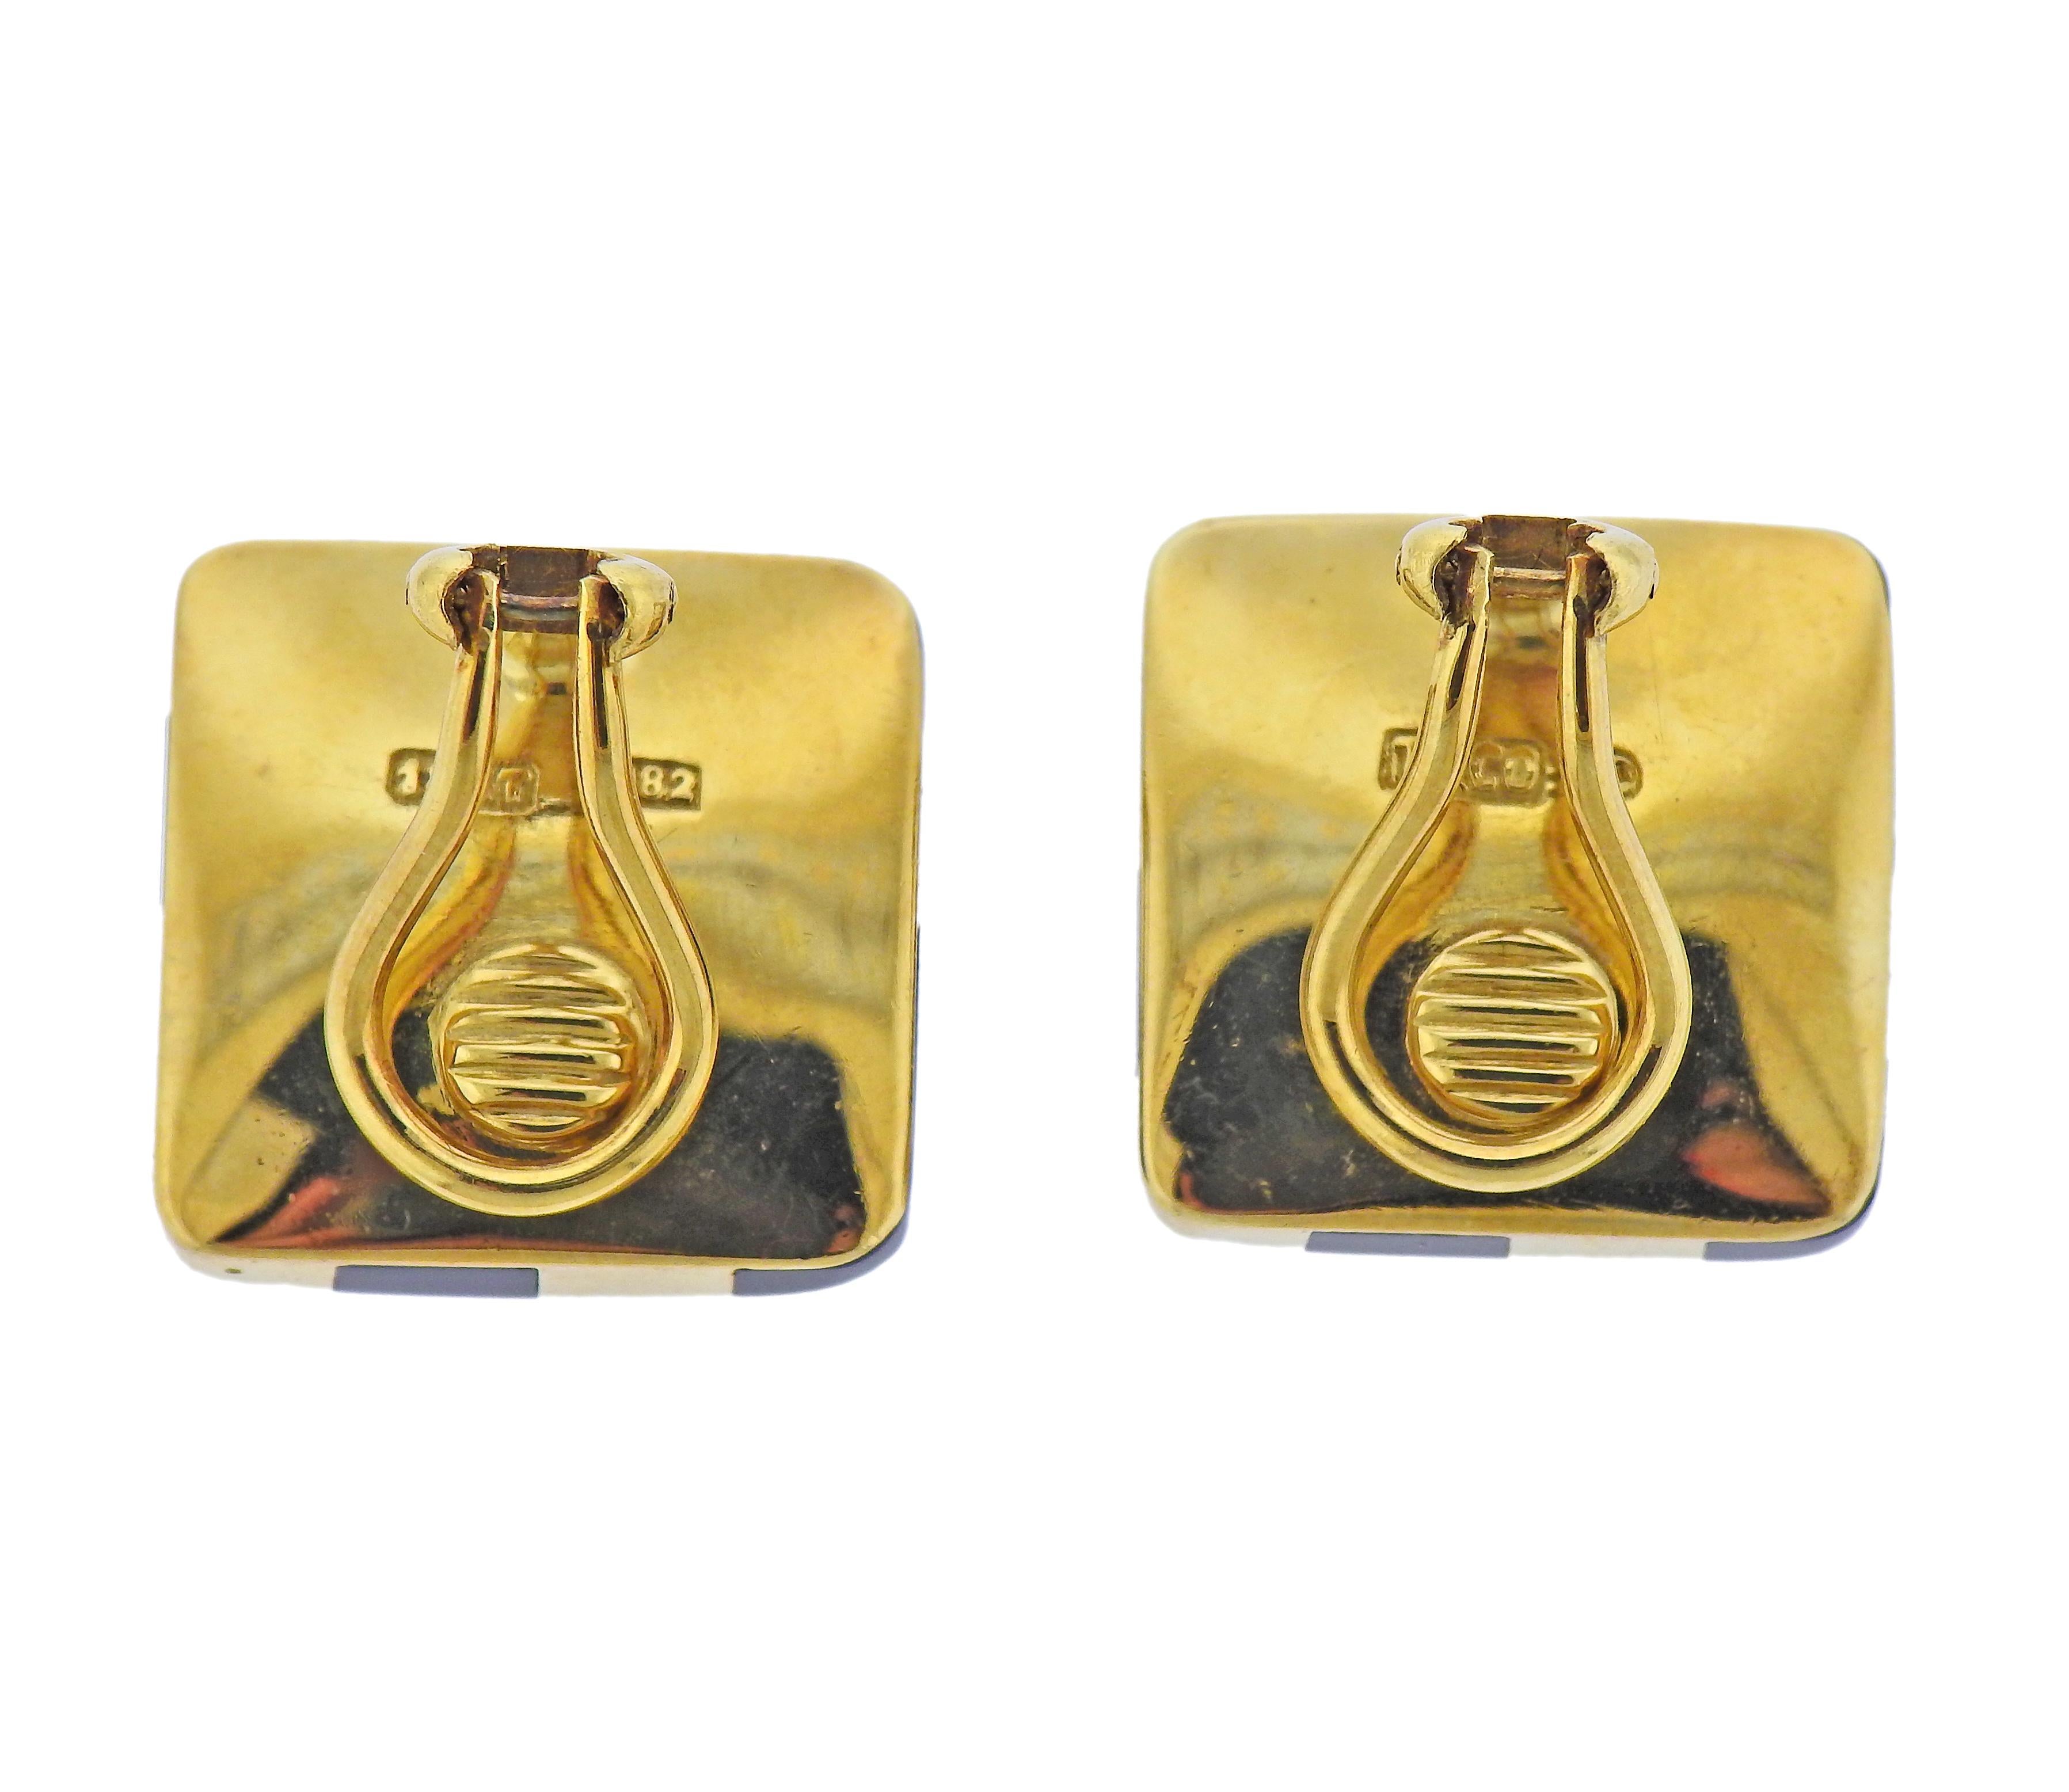 Pair of 18k yellow gold earrings with inlayed black jade, one small dent in the gold, visible upon very close inspection. Earrings are 20mm x 20mm. Marked: T & Co, 18kt, 1882. Weight - 17.5 grams. 